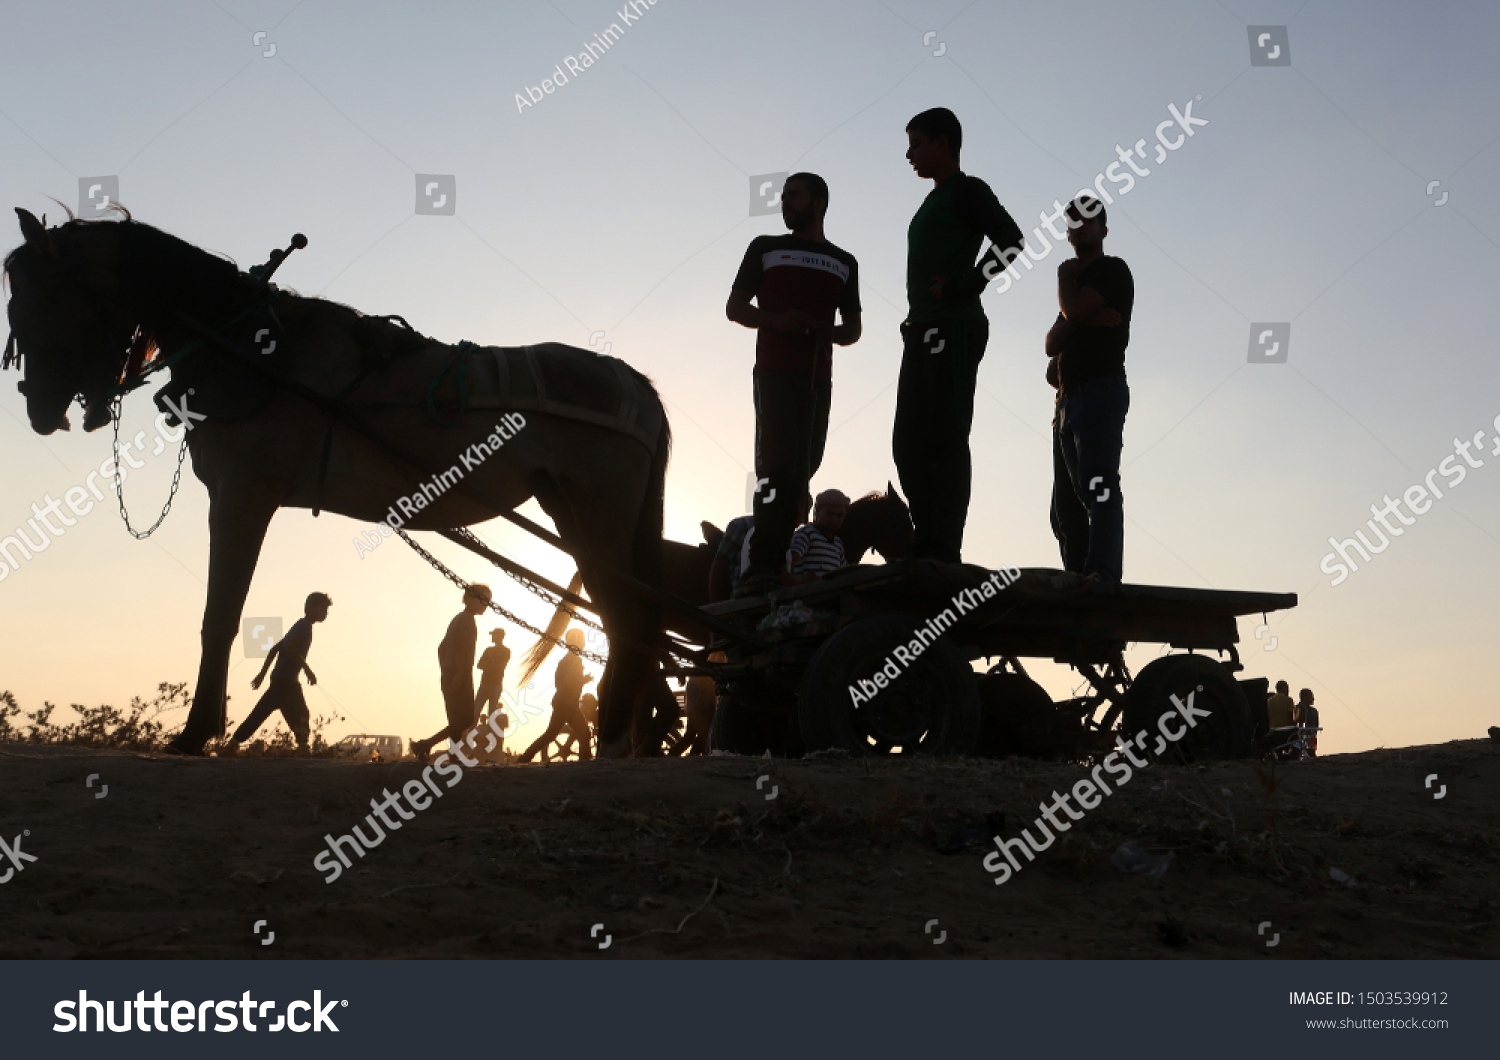 Palestinian Bedouins ride a horses and camel during a festival on the land of Gaza's destroyed airport, in Rafah, southern Gaza Strip, on September 10, 2019. Photo by Abed Rahim Khatib #1503539912